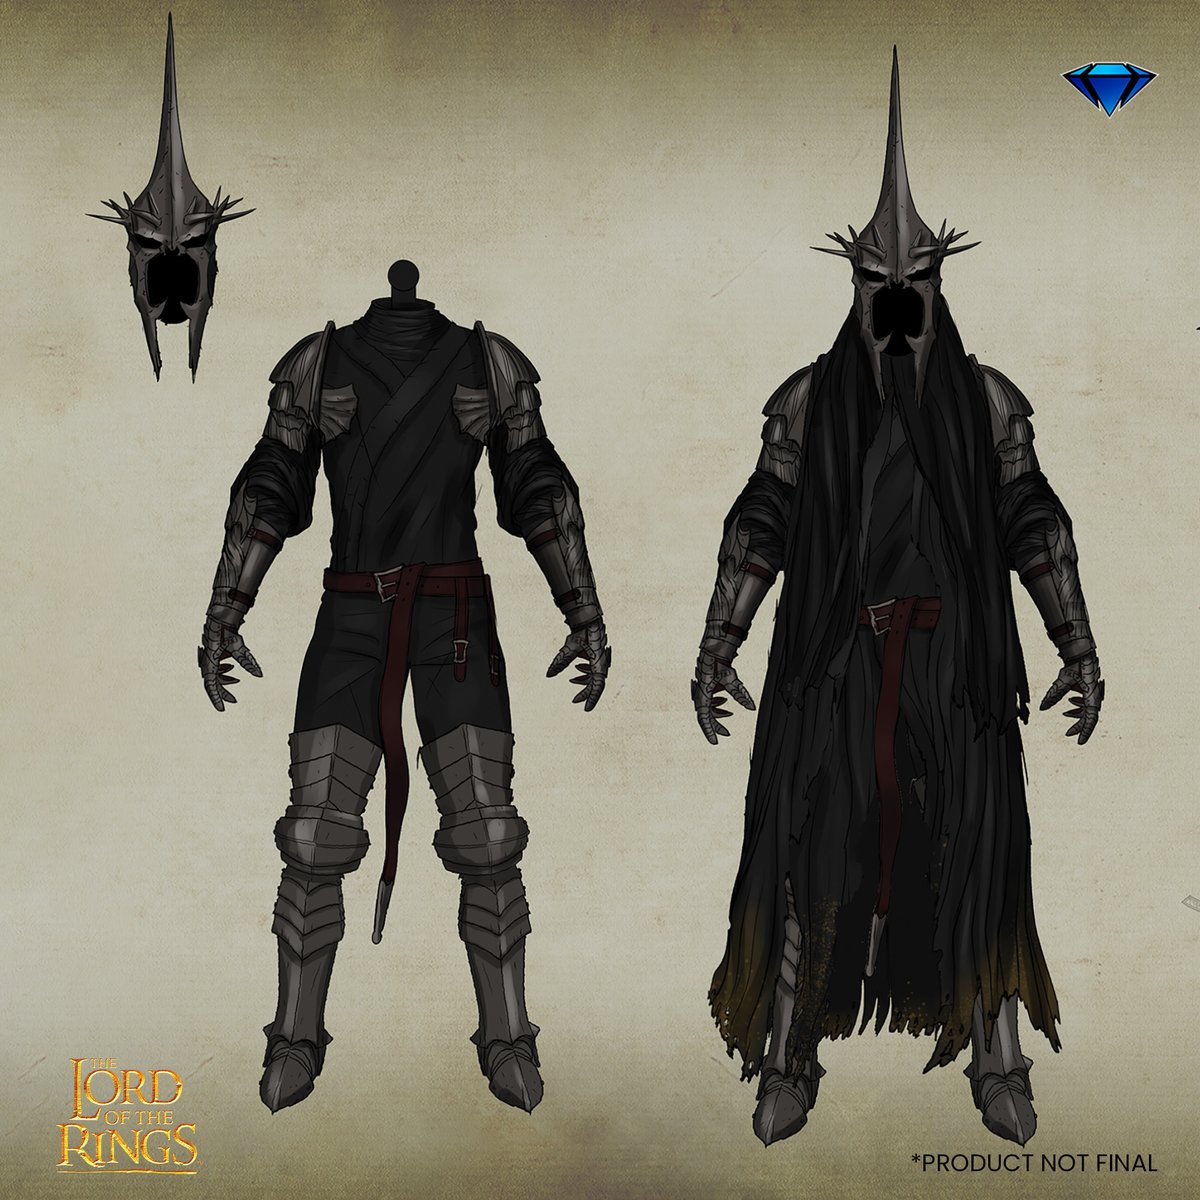 Check out concepts for the Witch King of Angmar by @Eamon_! The Lord of the Rings (Series 8 ) will also include our first female character of the line - Eowyn! Coming soon! #LOTR #Tolkien #LordOfTheRings #CollectDST #DiamondSelectToys